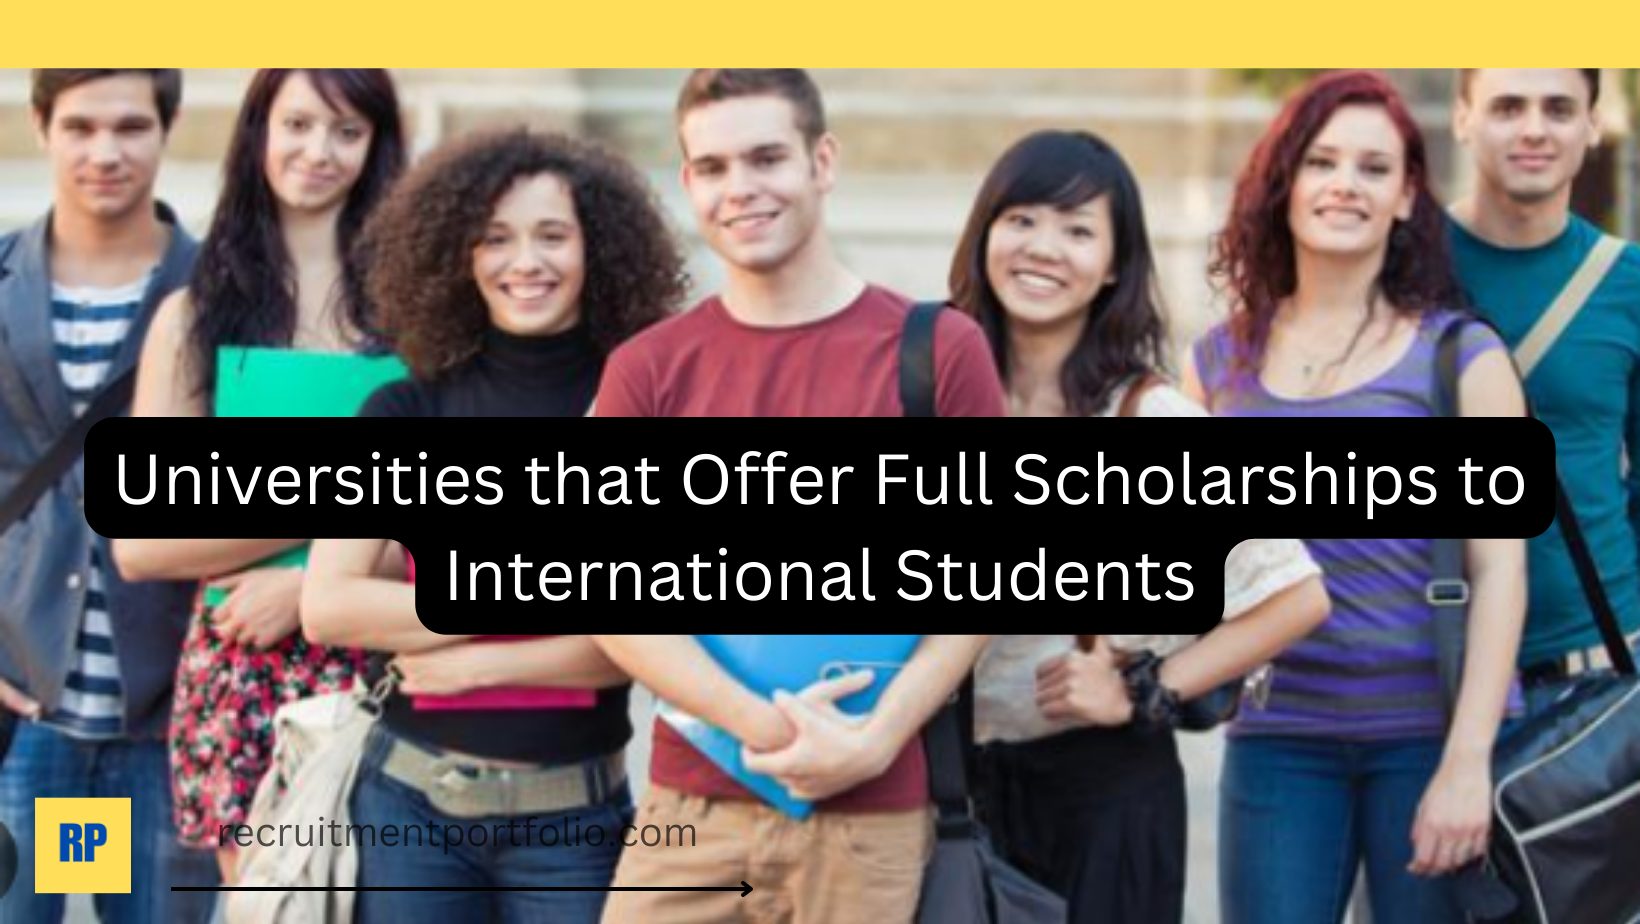 Universities that Offer Full Scholarships to International Students